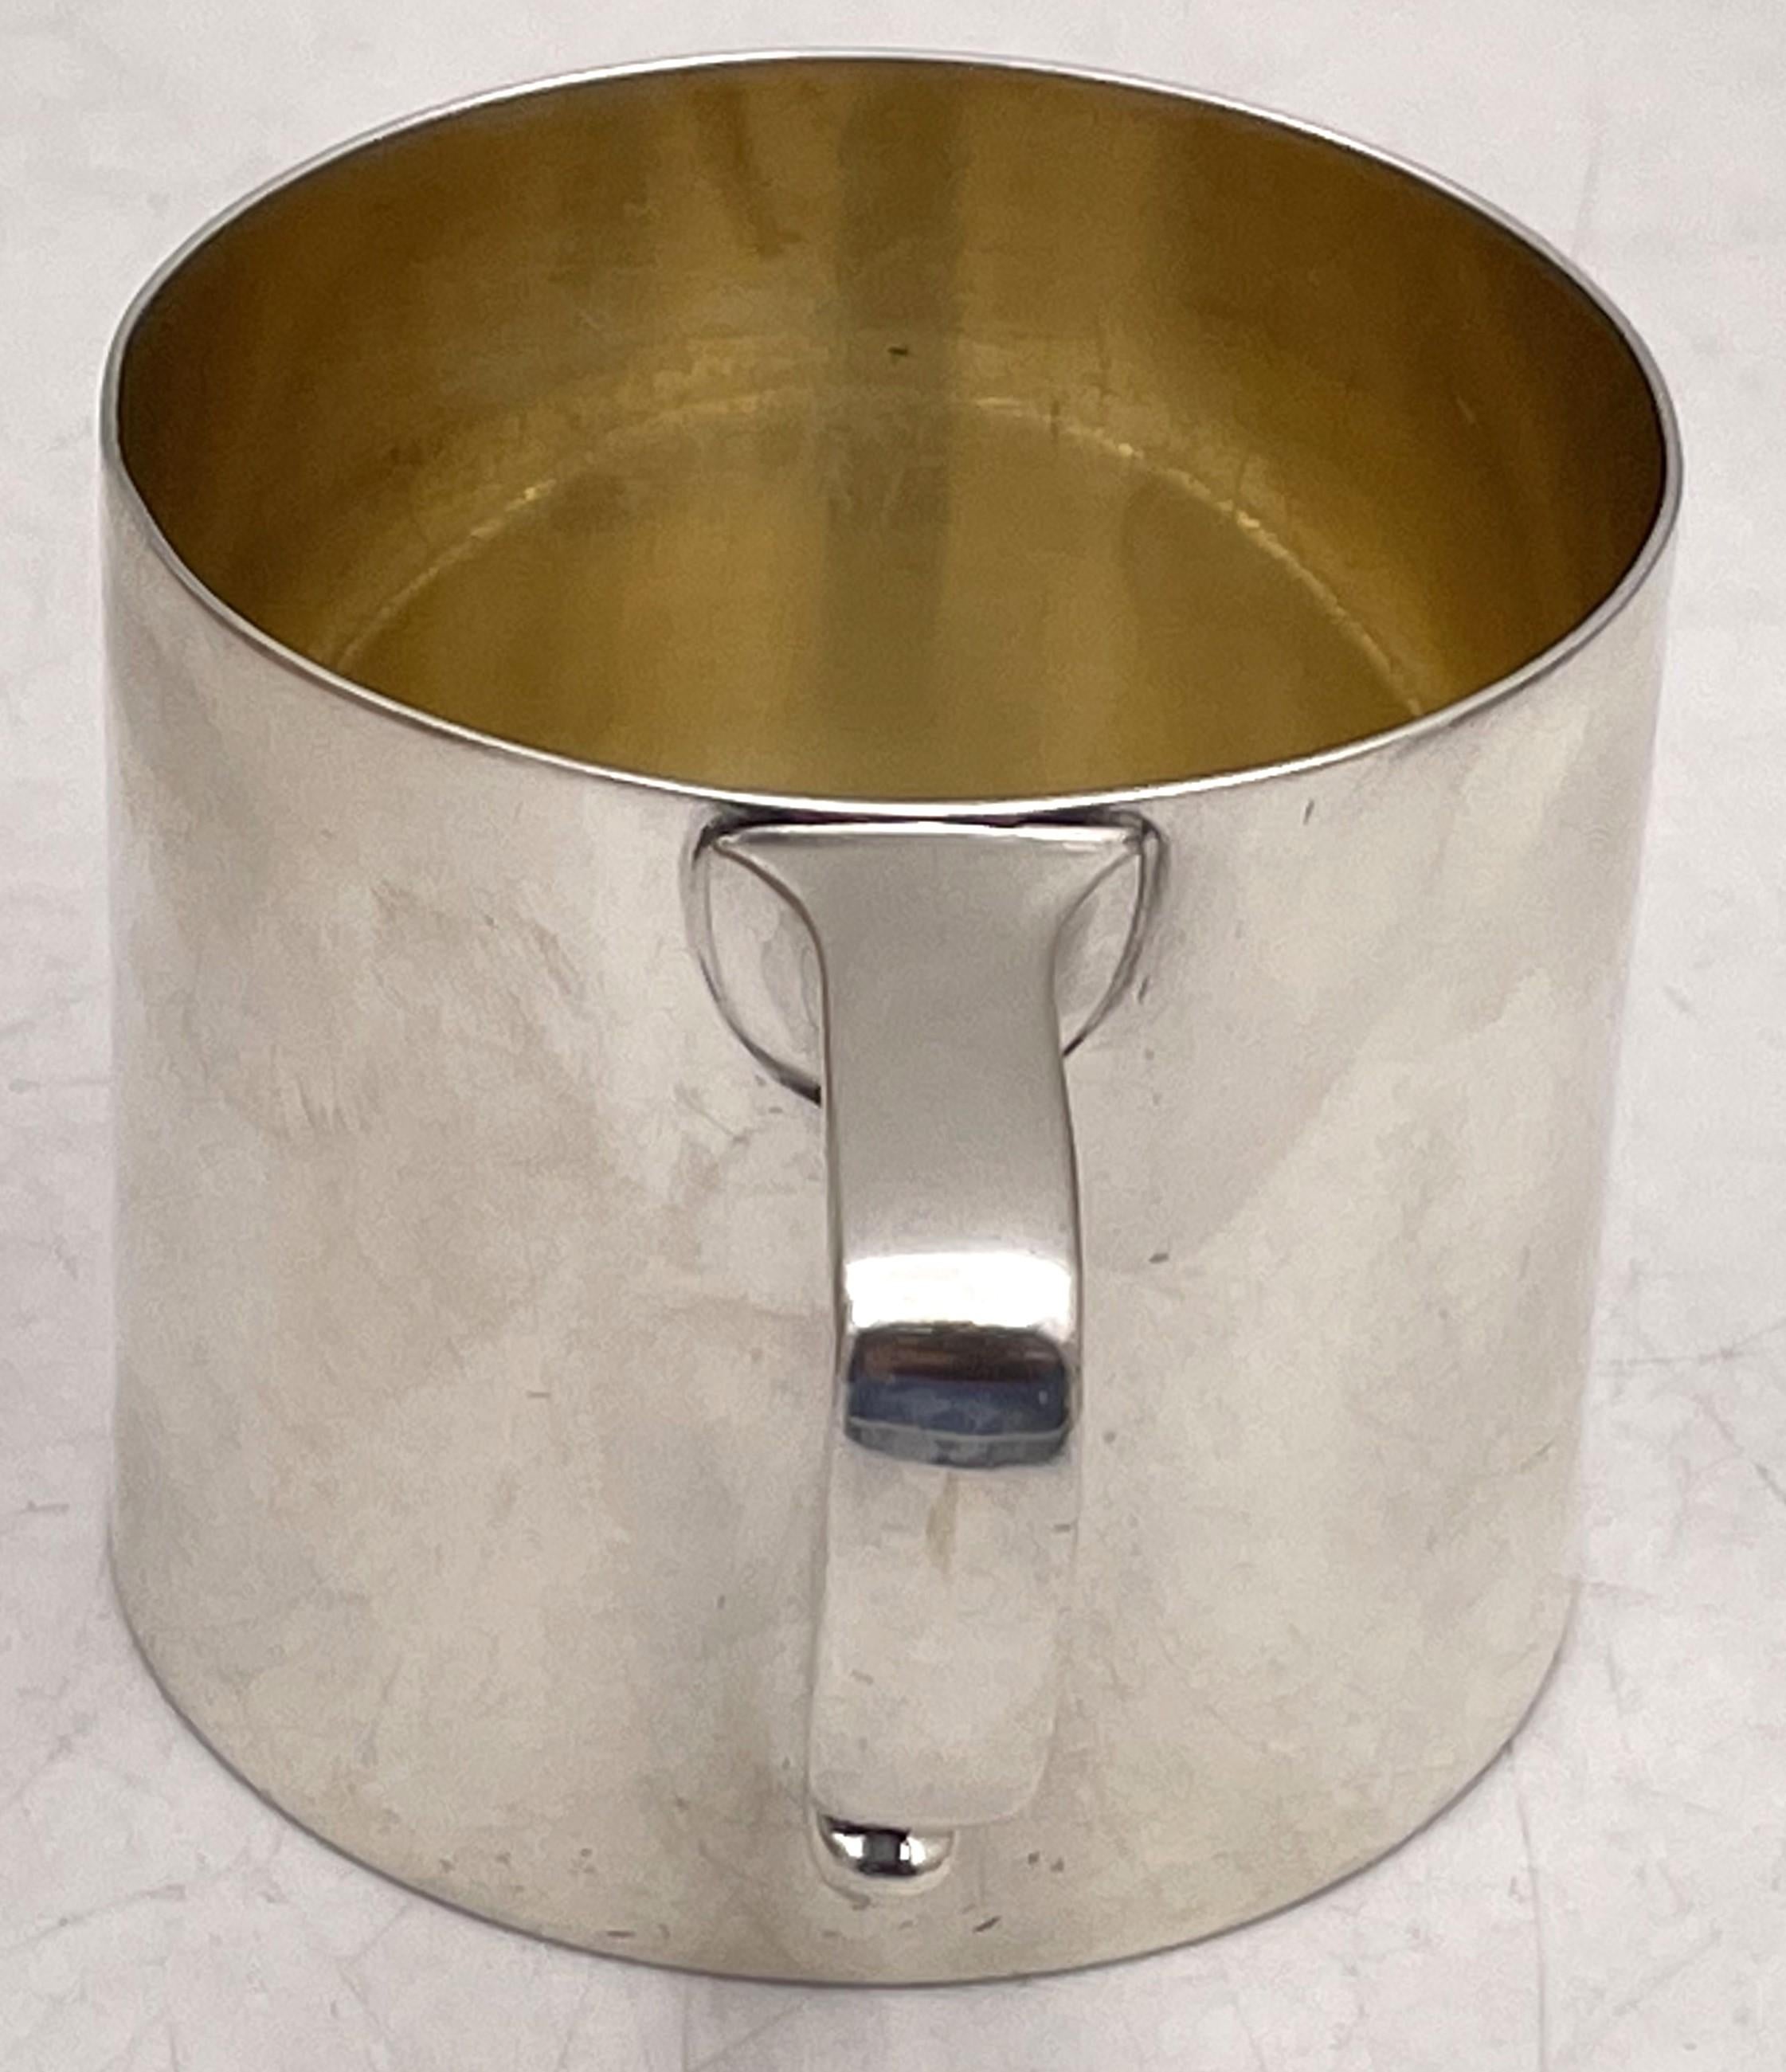 Gorham sterling silver child's or christening mug, made in the early 20th century, gilt inside, in Art Deco style with an elegant, geometric design. It measures 2 5/8'' in height by 2 2/3'' in diameter at the top, weighs 5.9 troy ounces, and bears